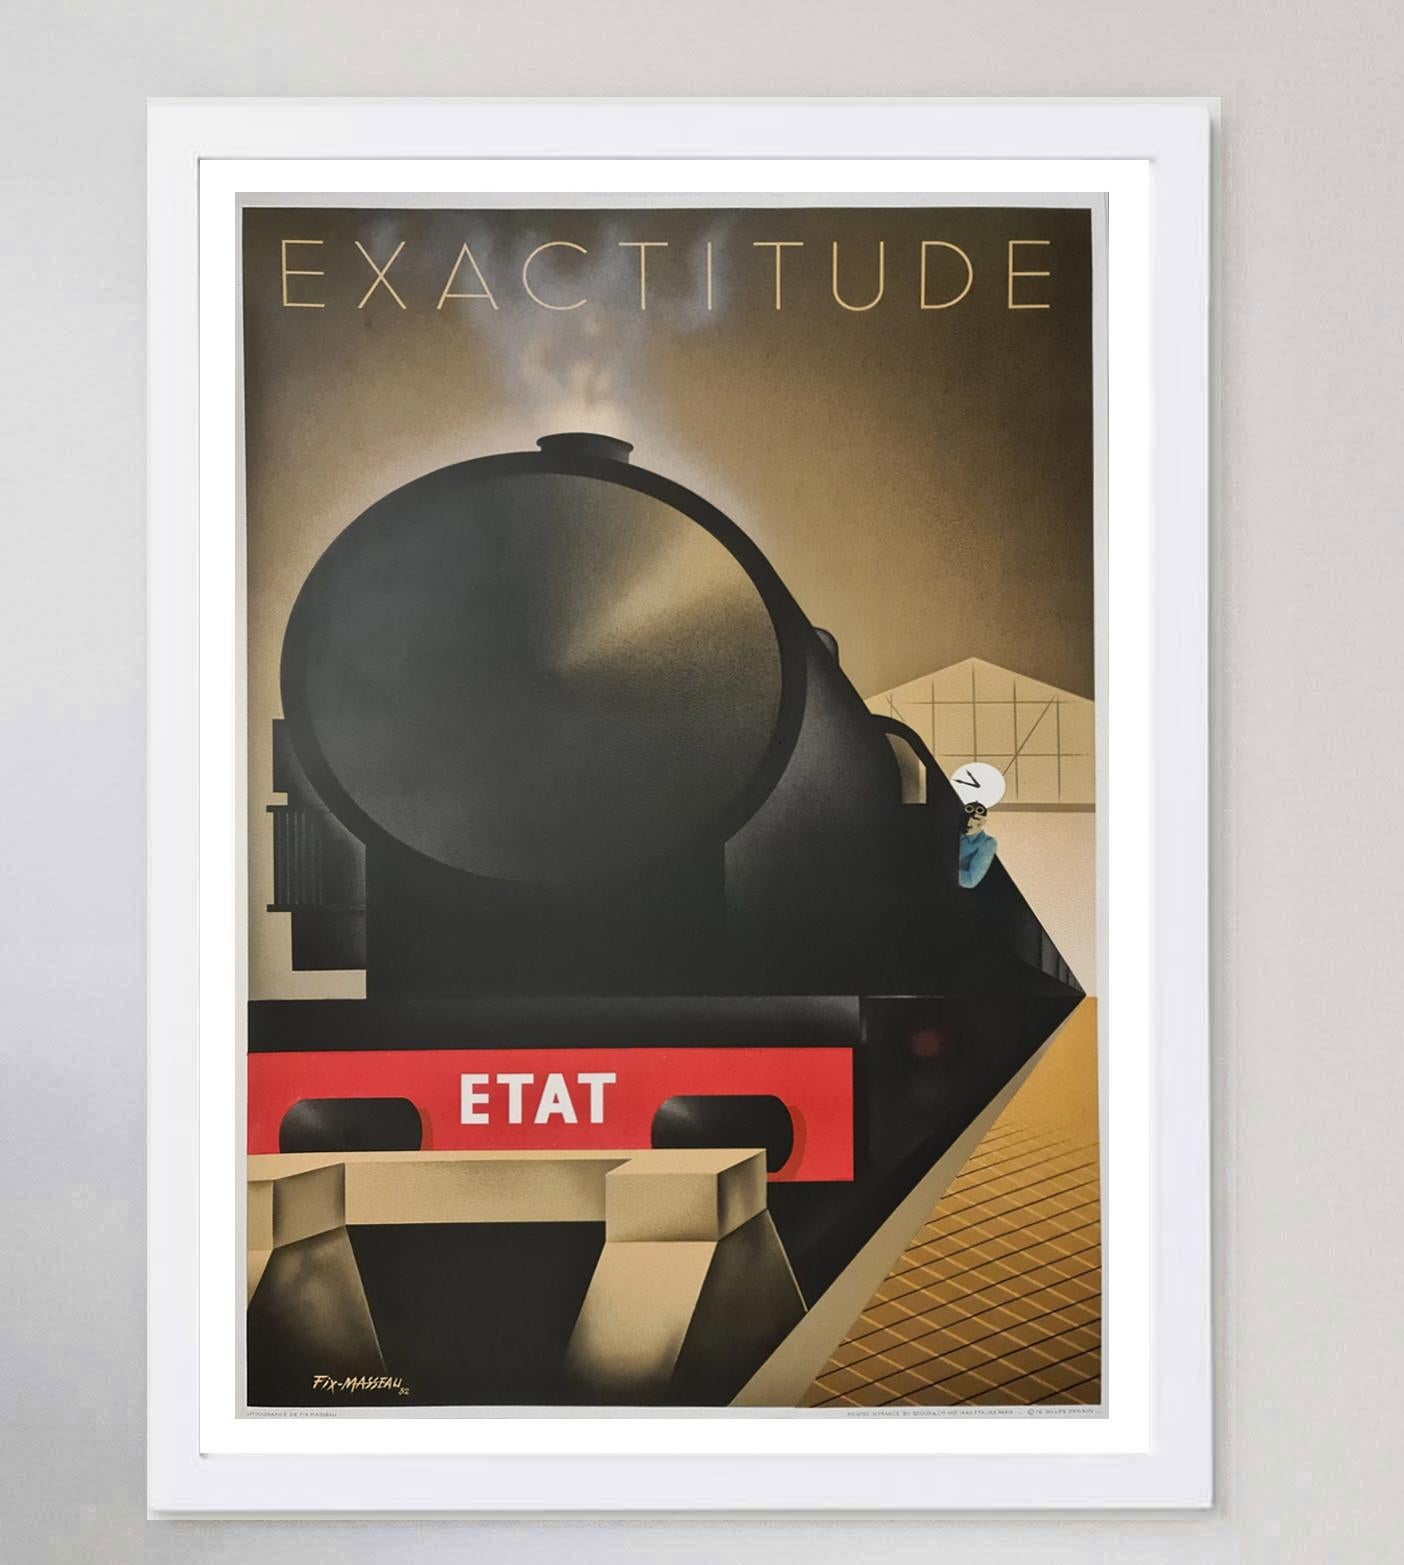 1982 Exactitude - Fix-Masseau Original Vintage Poster In Good Condition For Sale In Winchester, GB